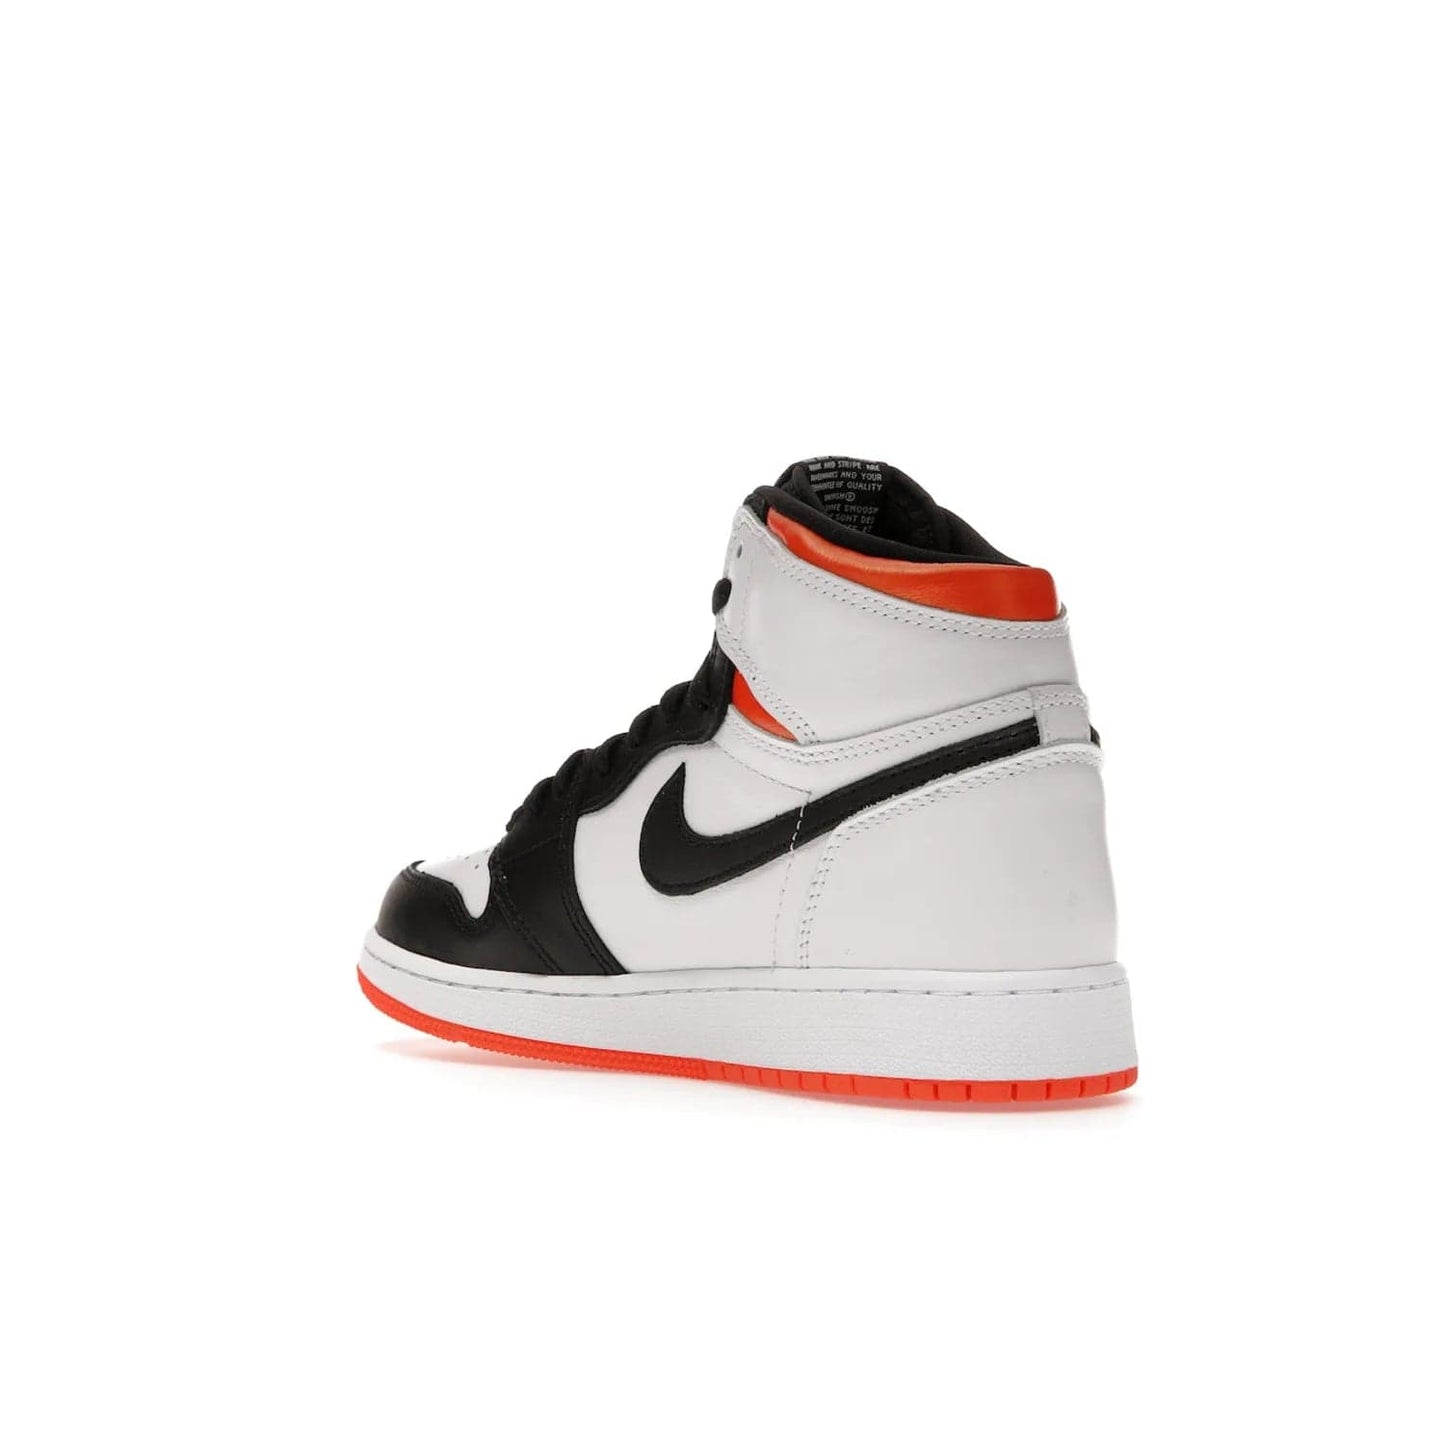 Jordan 1 High OG Electro Orange (GS) - Image 24 - Only at www.BallersClubKickz.com - The Air Jordan 1 High OG Electro Orange GS is the ideal shoe for kids on the go. Featuring white leather uppers, black overlays, and bright orange accents, it's sure to become a favorite. A great mix of classic style and vibrant colors, the shoe delivers air cushioning for comfort and hard orange rubber for grip. Release on July 17th, 2021. Get them a pair today.